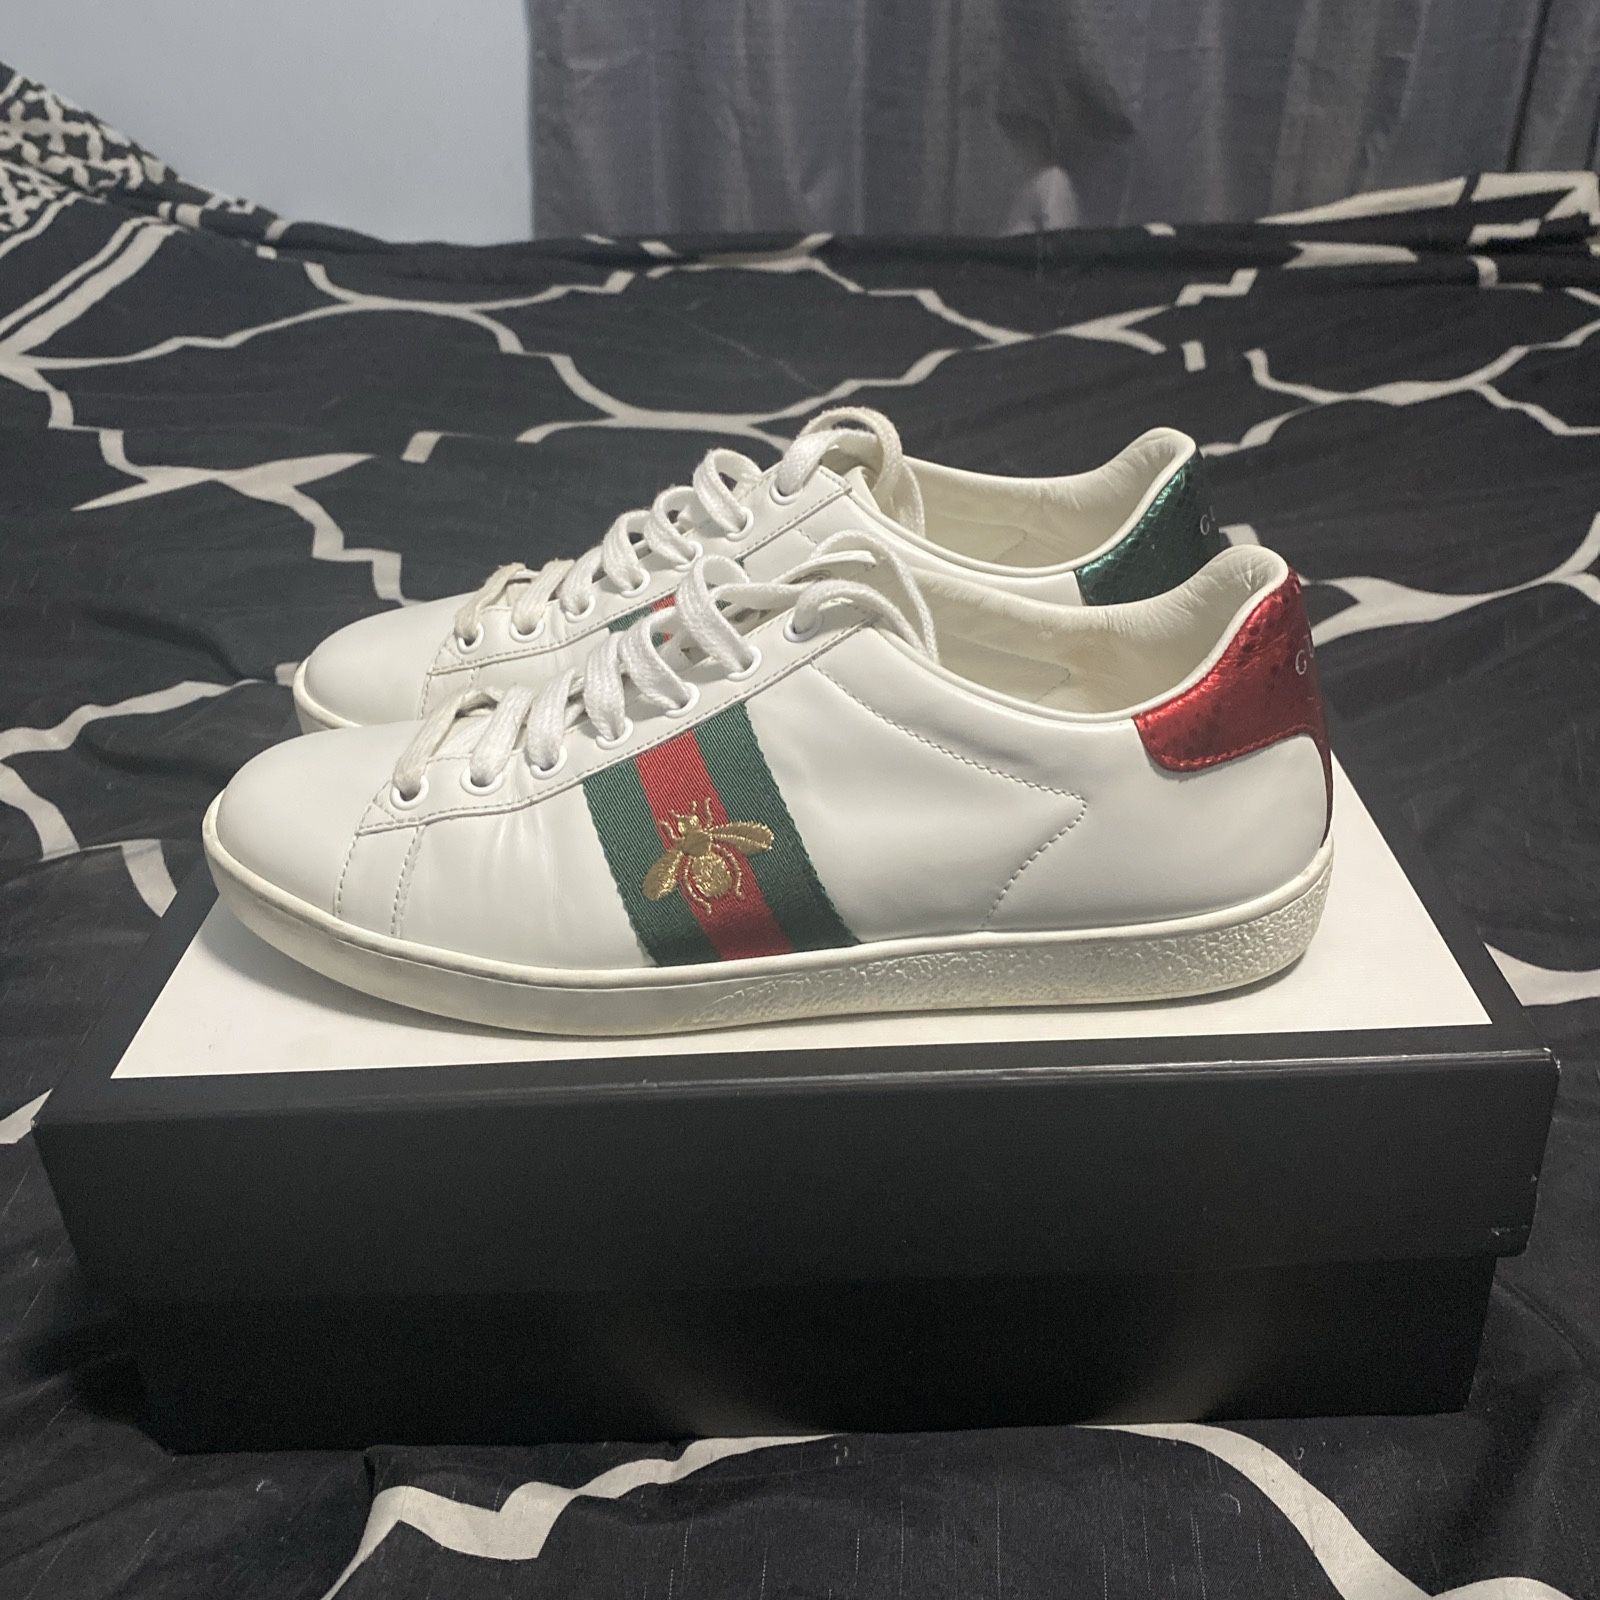 Gucci Ace Bee Embroided Shoes 